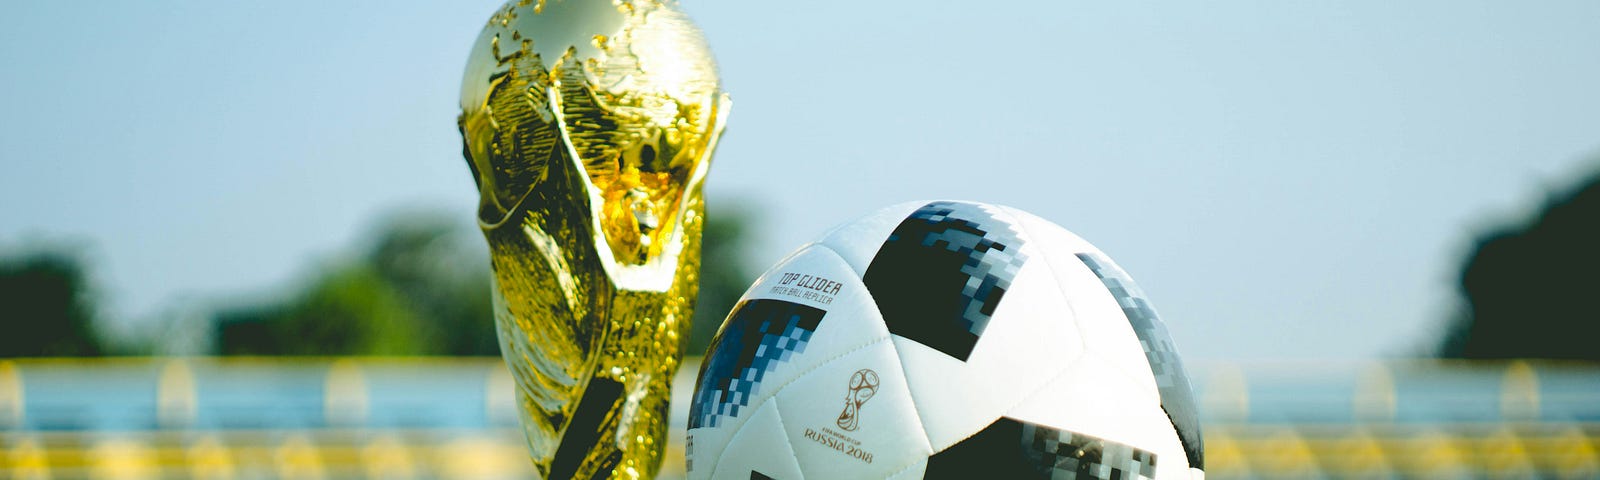 Football and trophy in close-up on an outdoor pitch with stands behind.